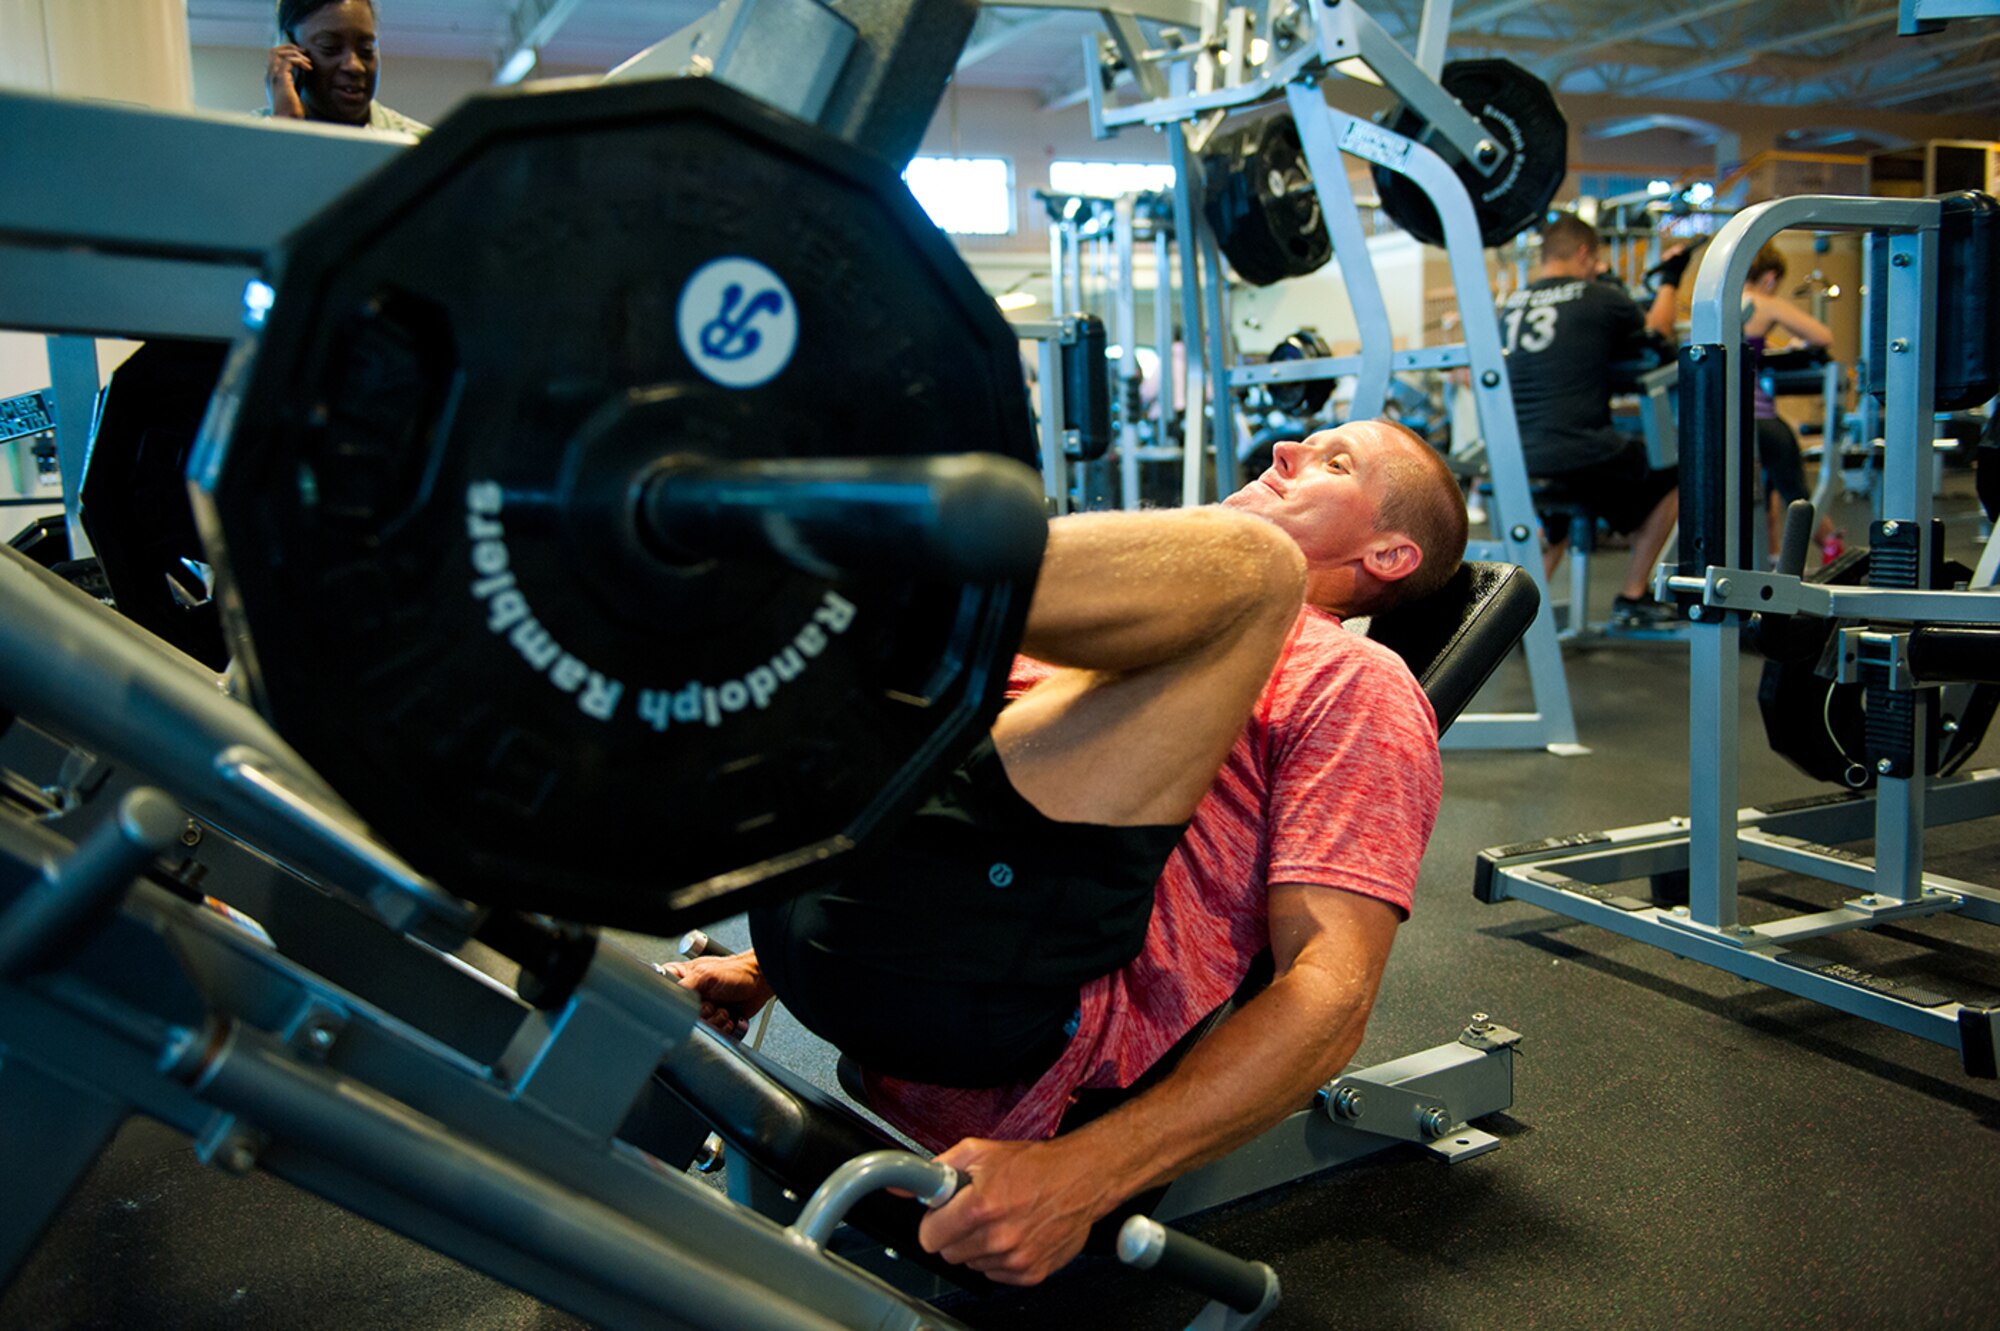 U.S. Air Force Lt. Col. Stephen Frank, instructor pilot, 559 Flying Training Squadron, performs leg press to build up his quads and lower muscle groups, 16 July, 2014, Joint Base San Antonio-Randolph, Texas. (U.S. Air Force photo by Tech. Sgt. Sarayuth Pinthong/ Released)